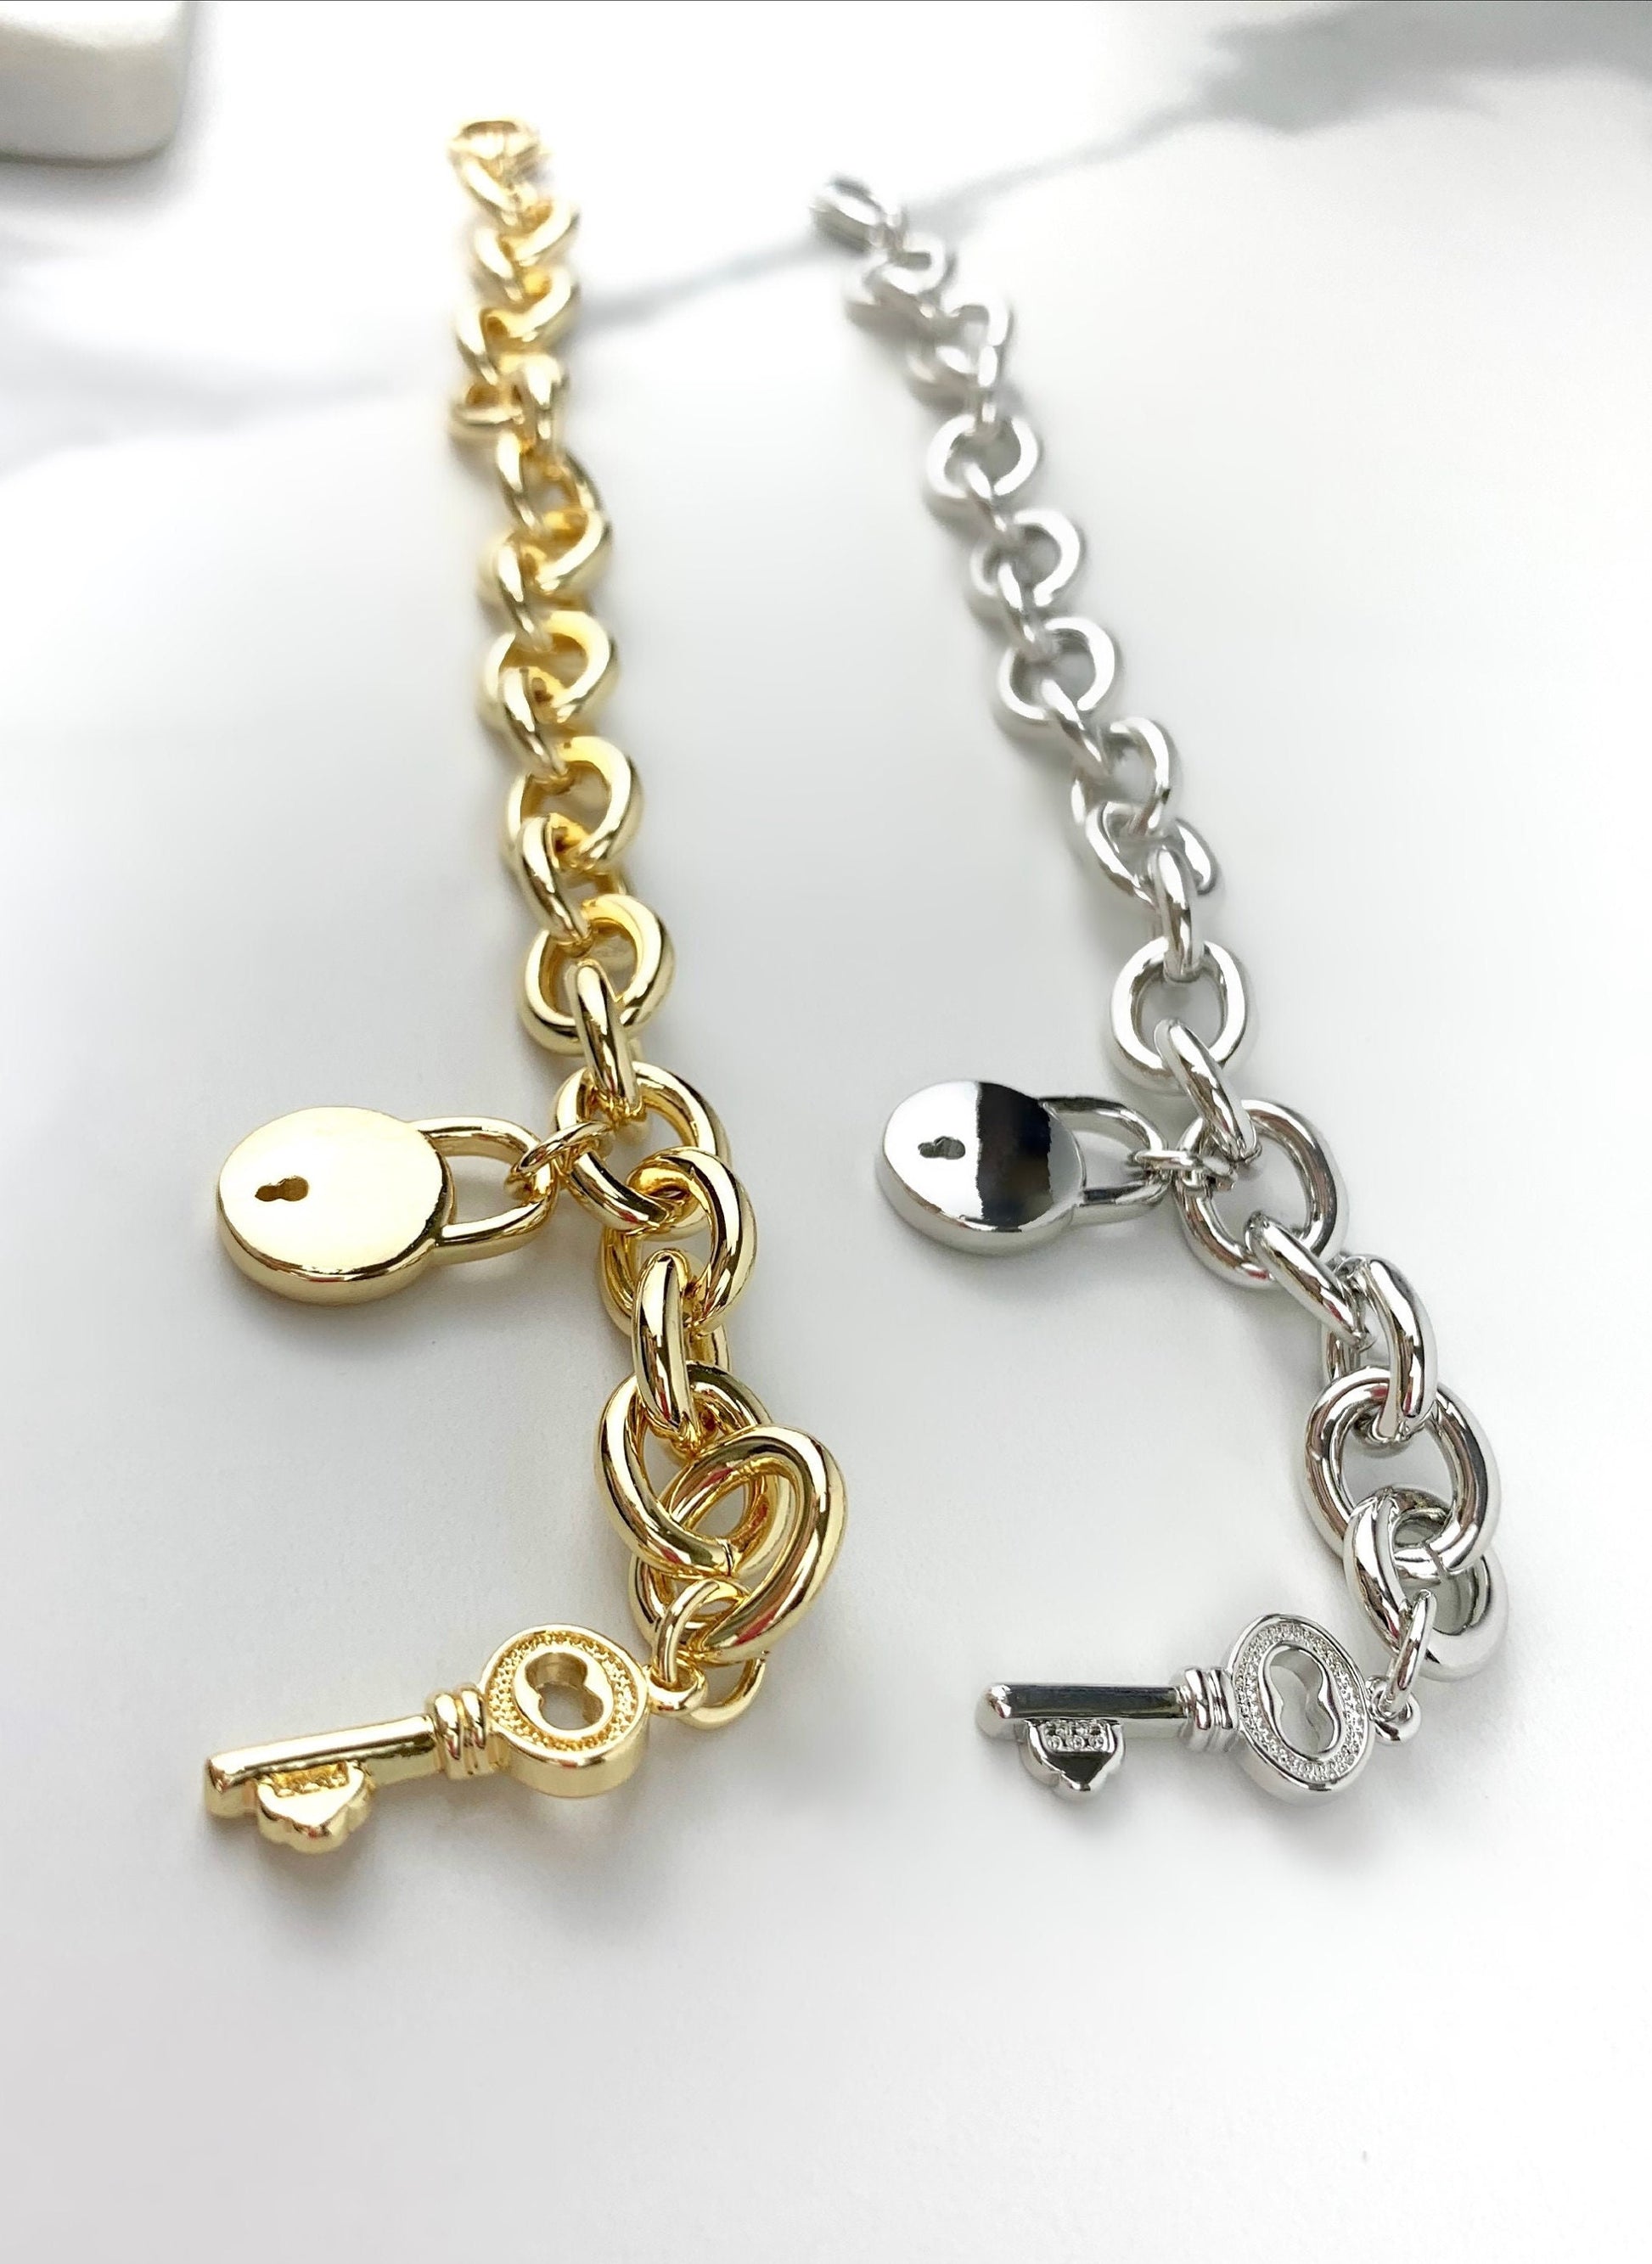 Chunky 18k Gold Filled Oval Link Chain Charms Bracelet Featuring Lock and Key, Gold or Silver, Wholesale Jewelry Supplies